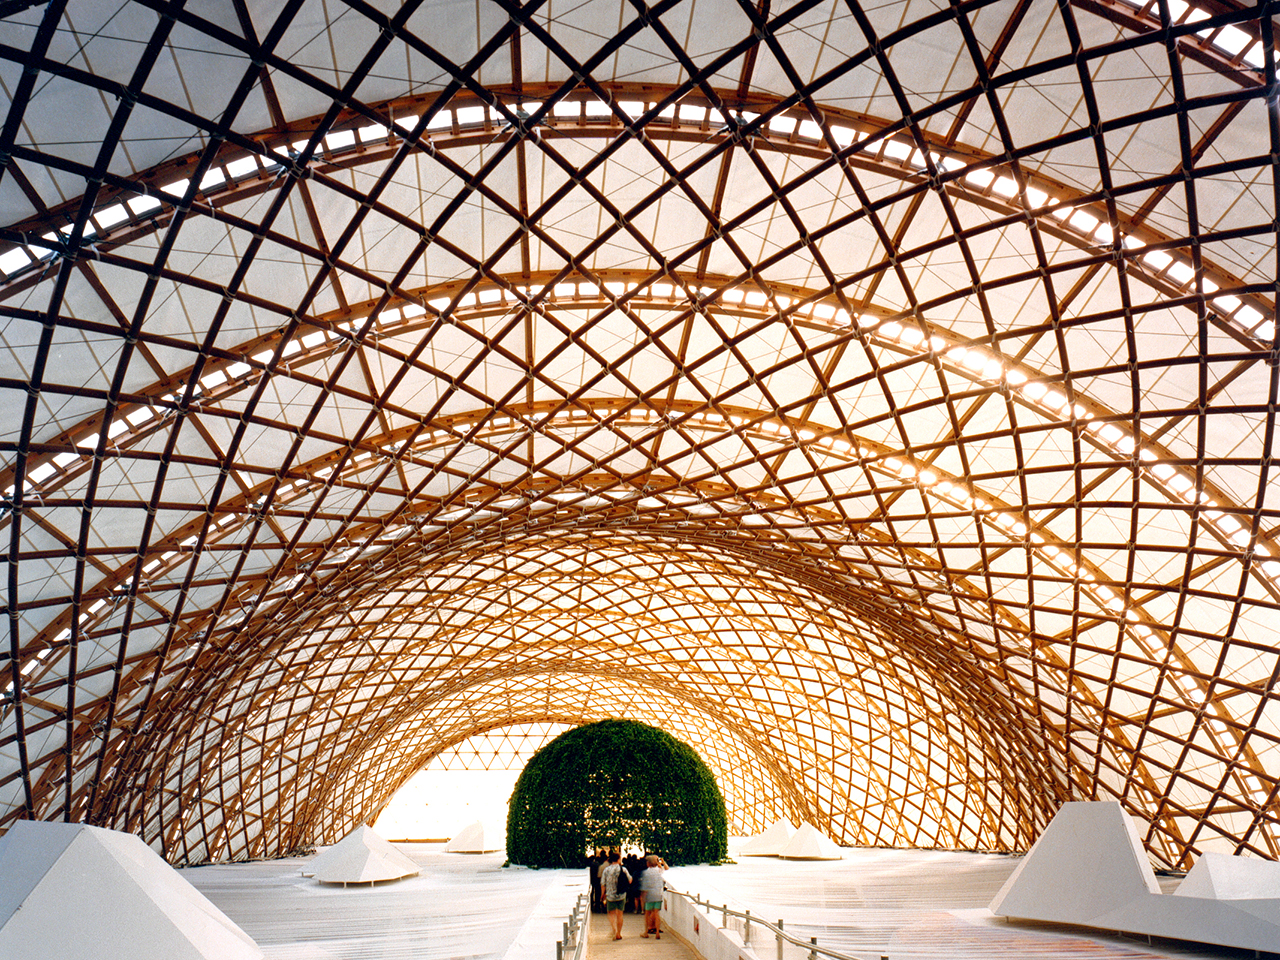 SSP - EXPO 2000 Pavillon Japan, Hannover